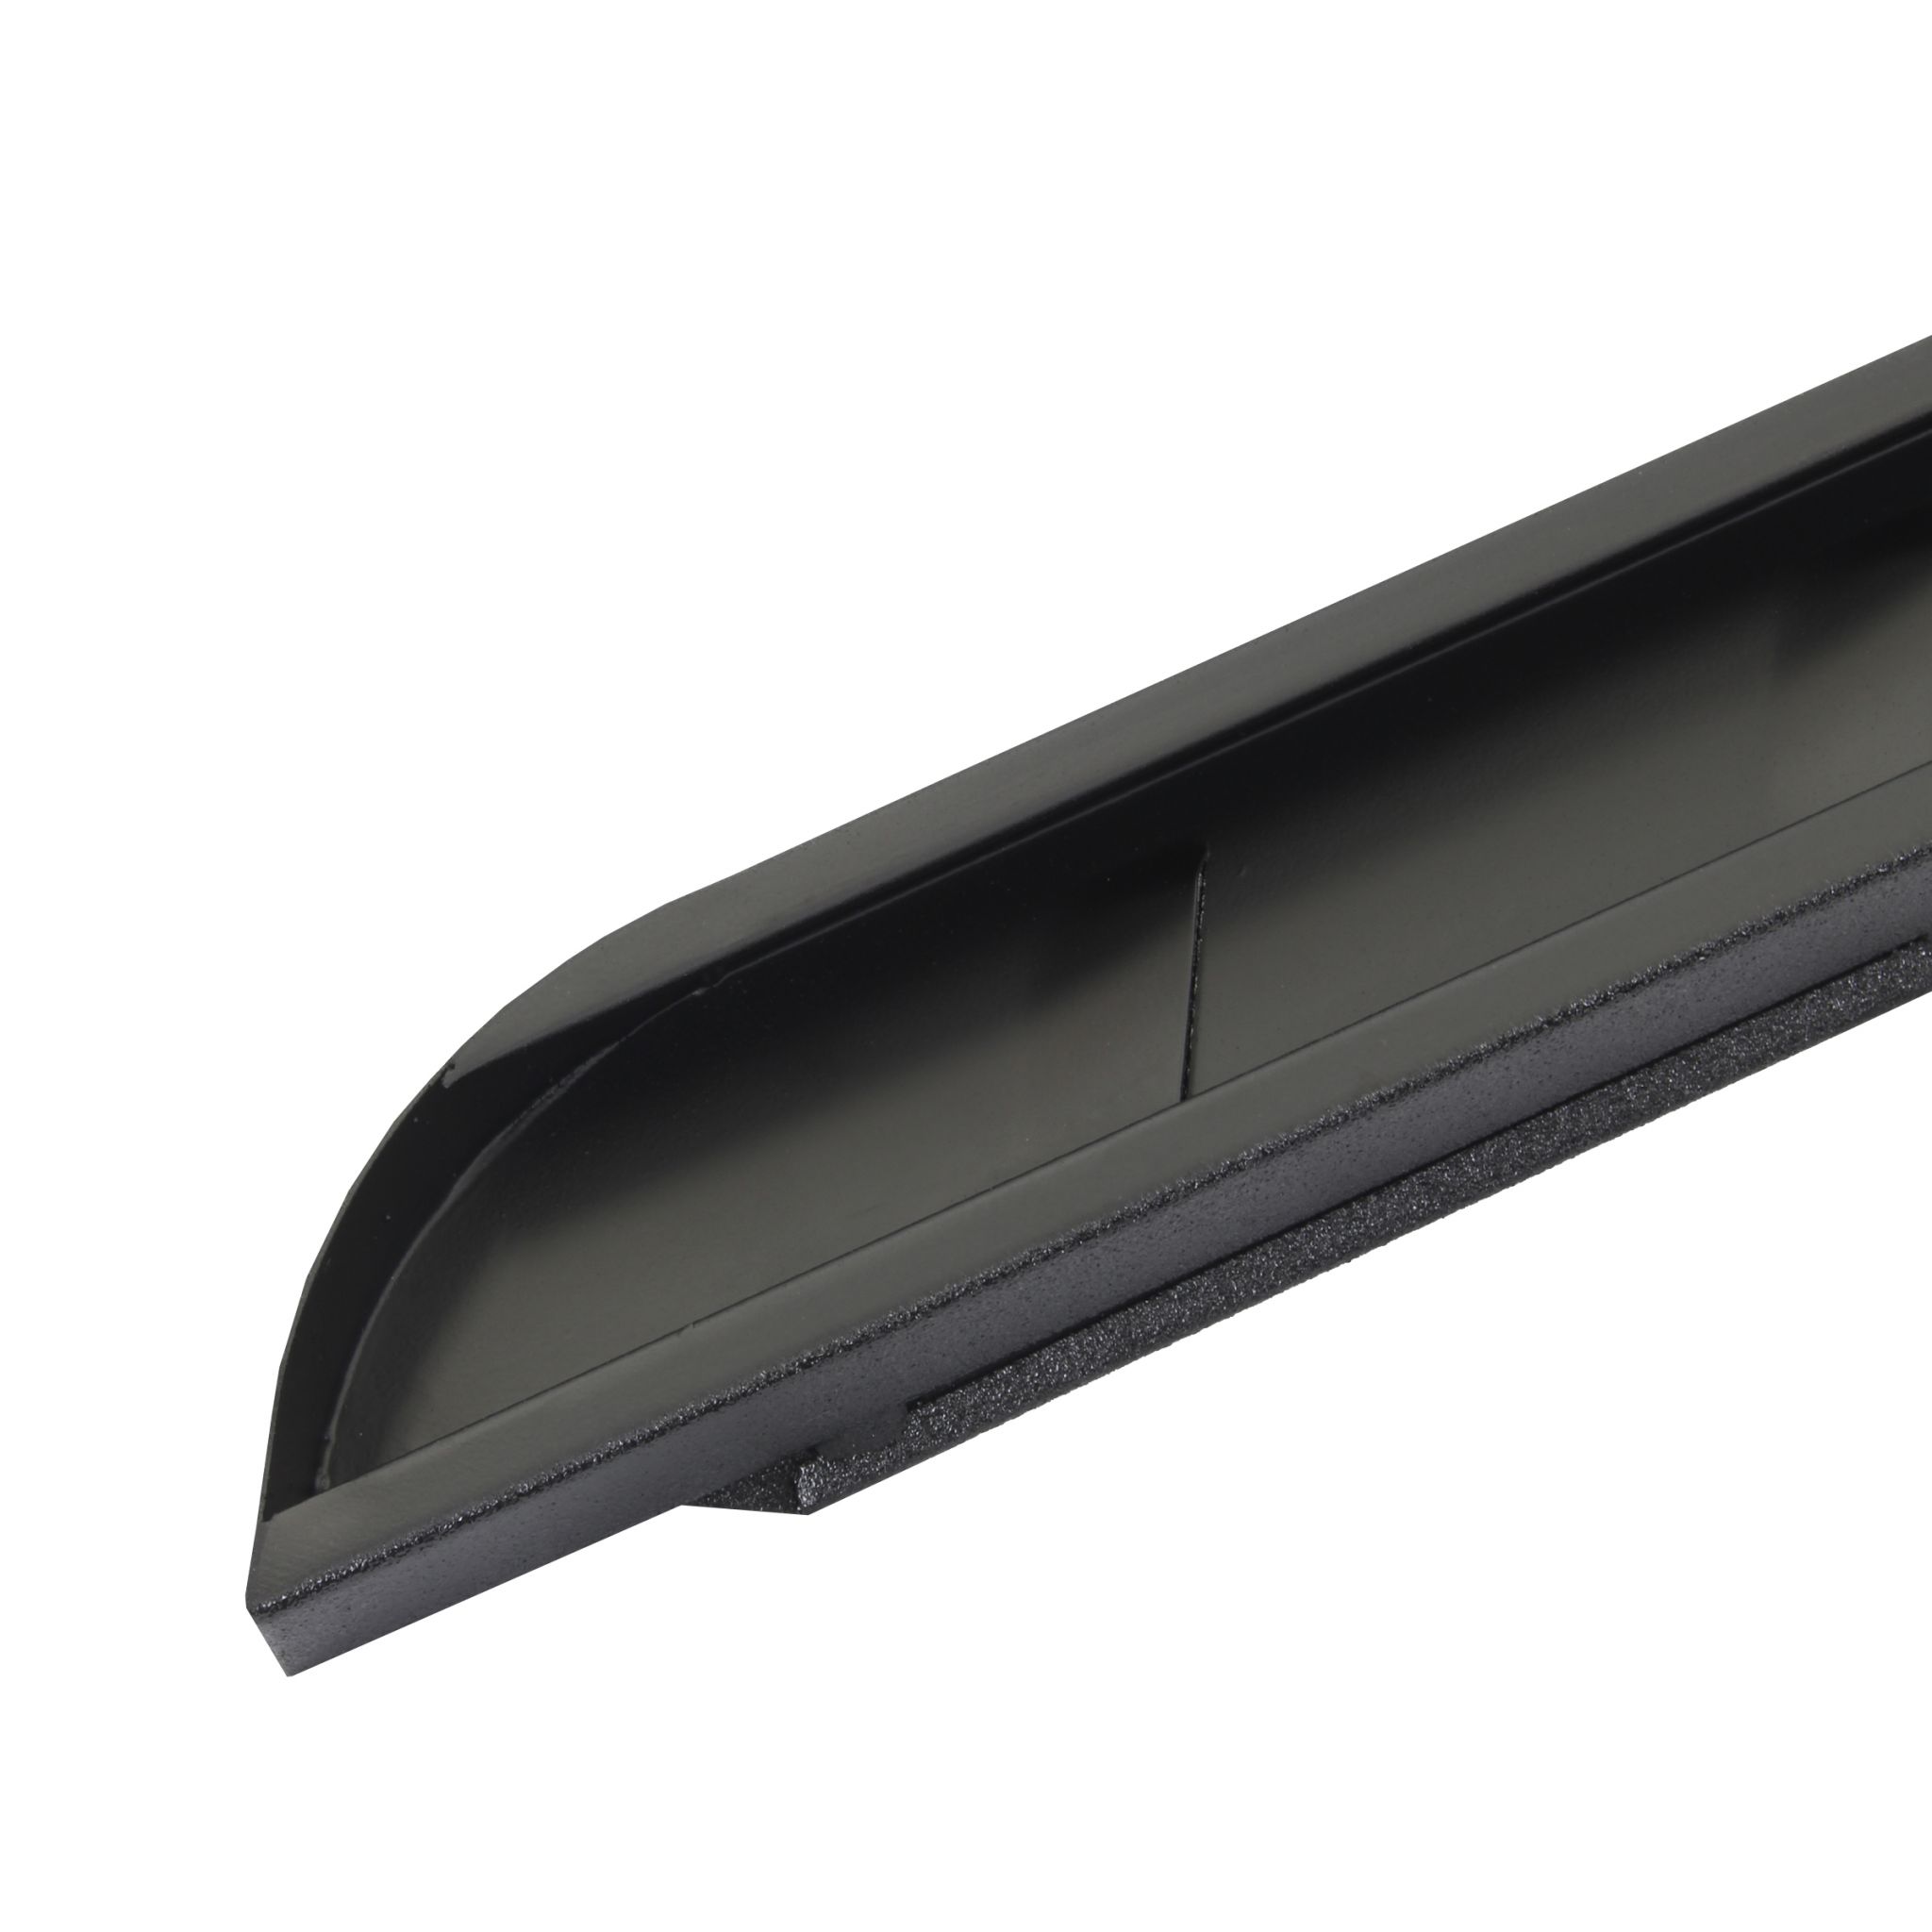 Go Rhino 63404280ST - RB10 Slim Line Running Boards With Mounting Brackets - Protective Bedliner Coating